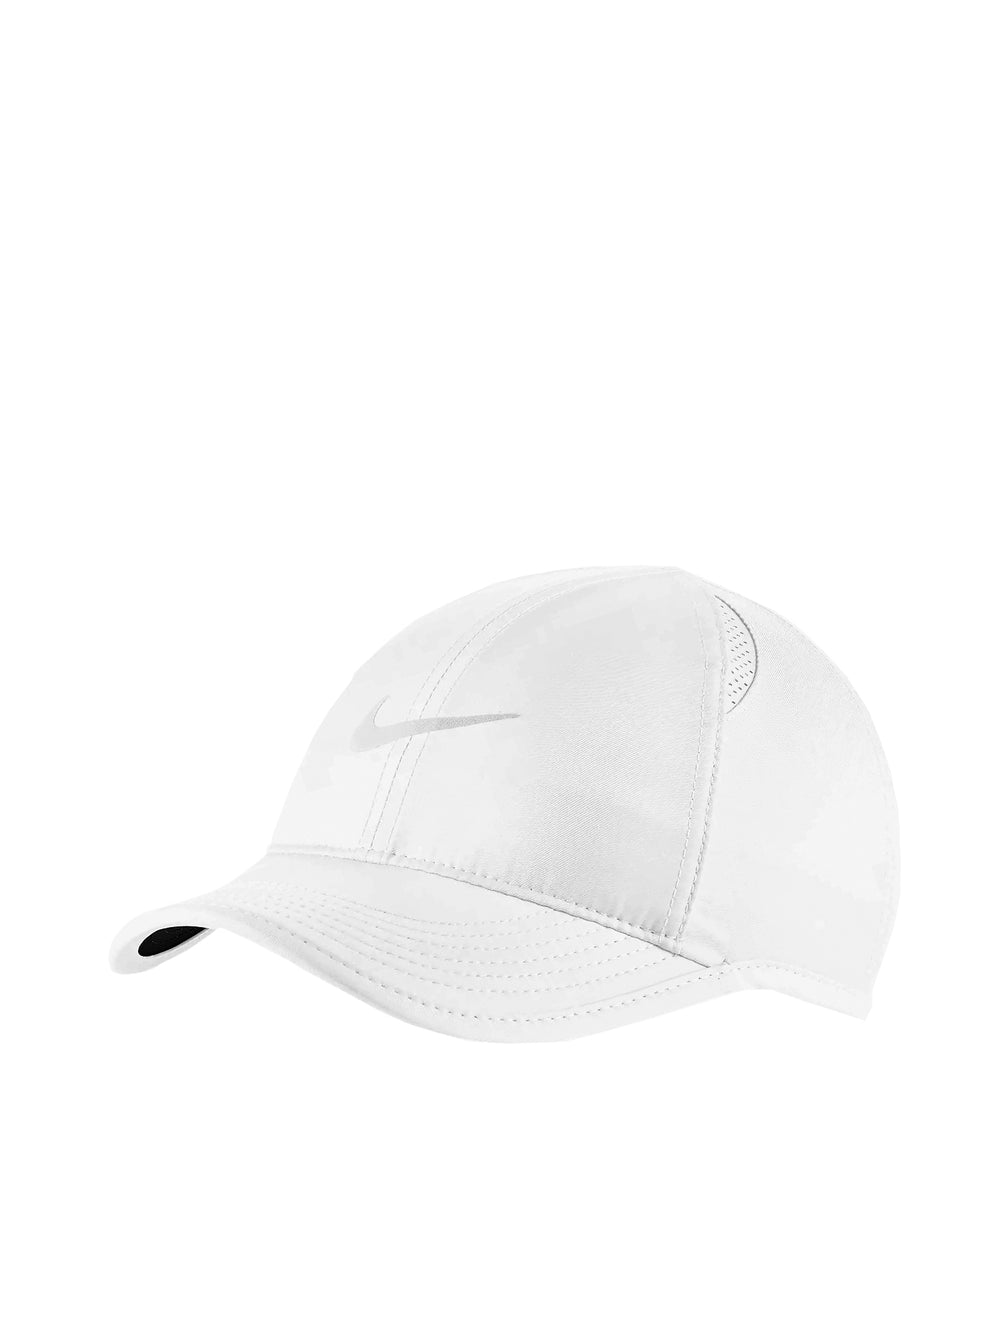 NIKE FEATHERLIGHT CAP - WHITE - CLEARANCE